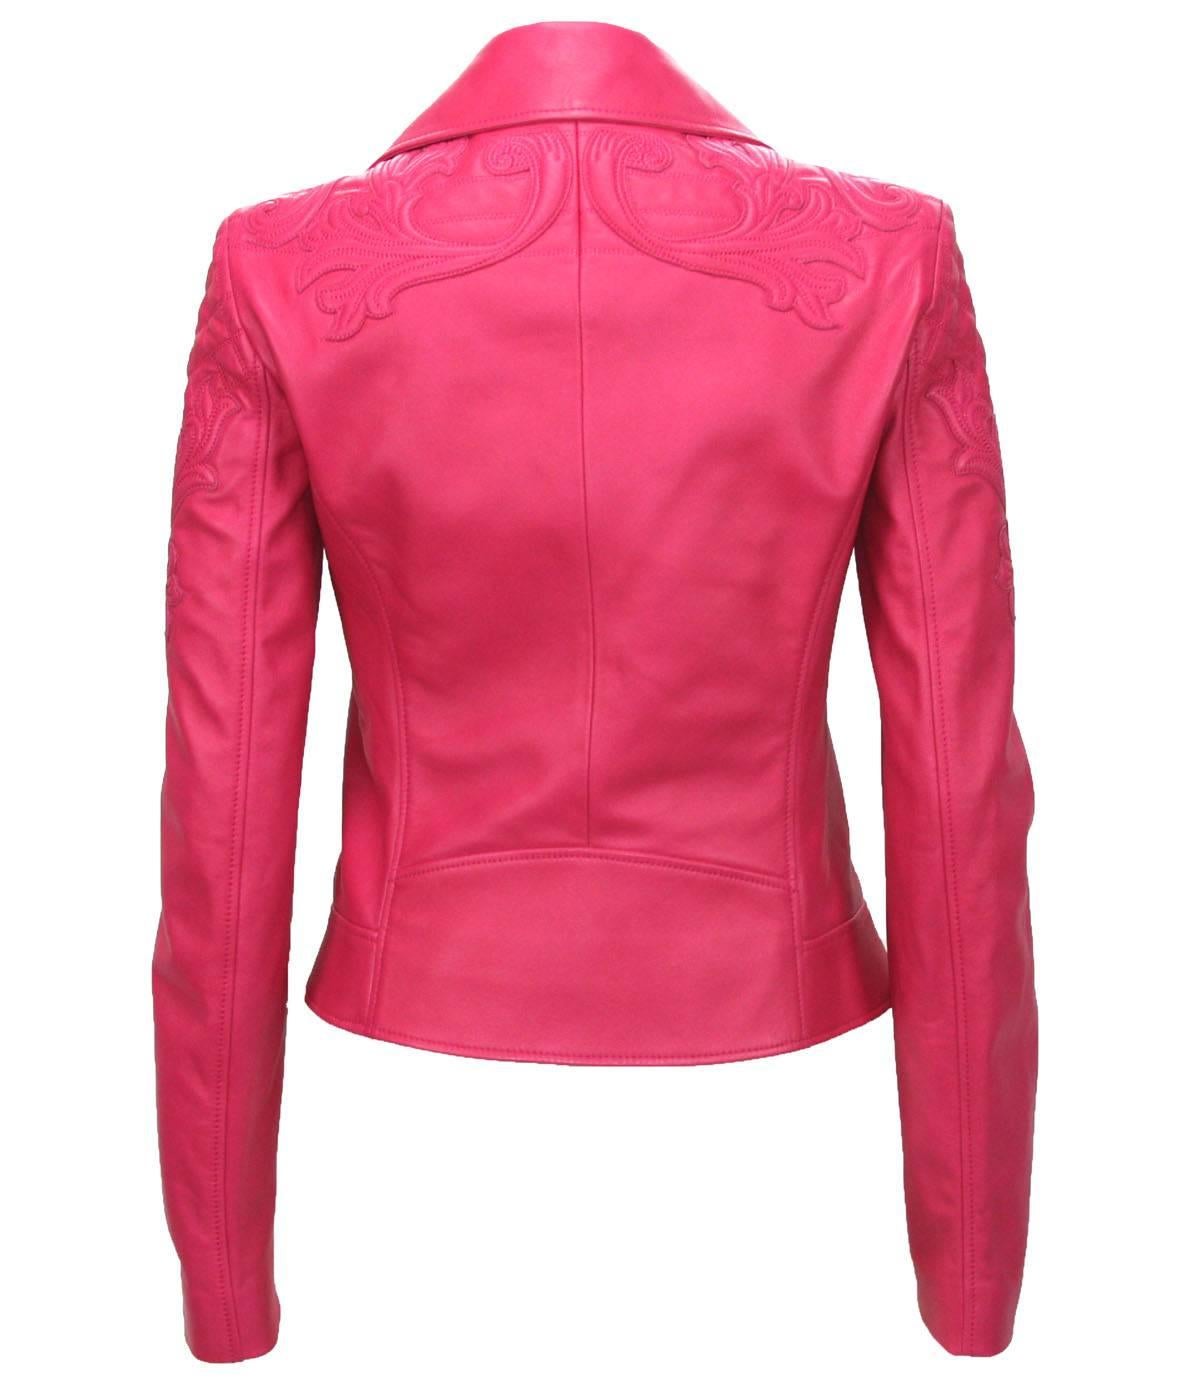 New Sexy and Hot VERSACE Vanitas Barocco Leather Moto Jacket
Italian Size - 38
Color - Hot Pink, 100% Soft Leather, Quilted Swirl Design, Front Zipper Closure
Two Side Zip Pockets, Fully Lined in Designer Logo Fabric, VERSACE Silver Tone Metal